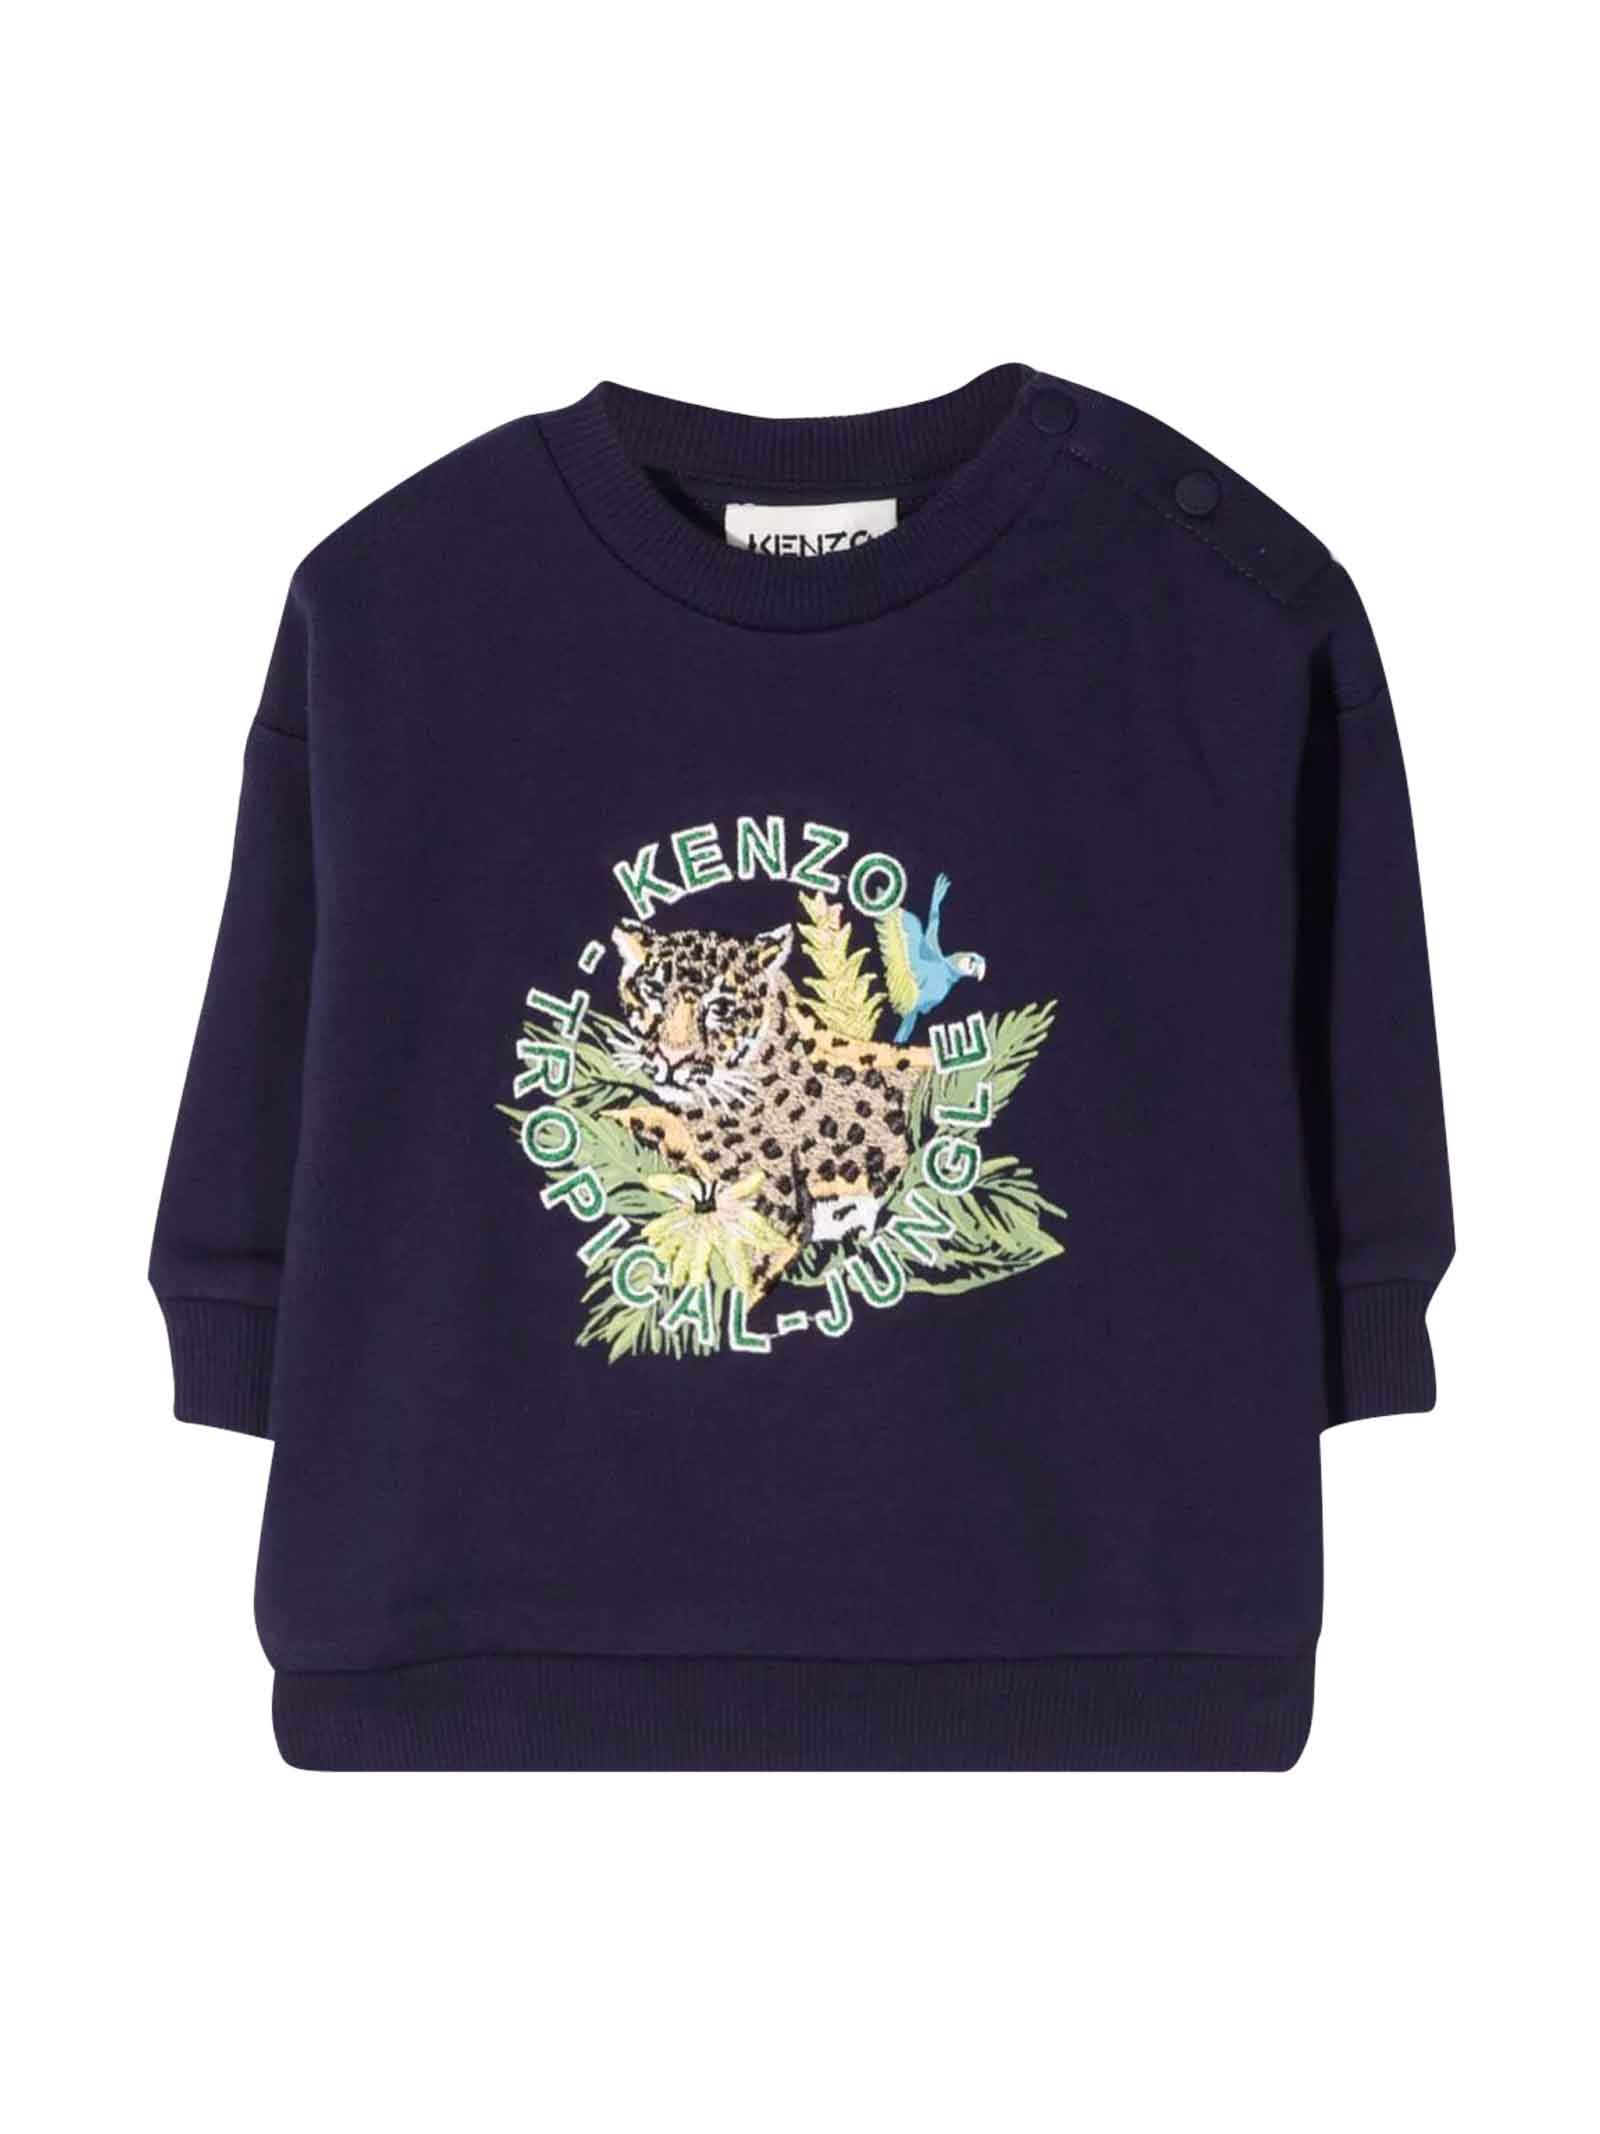 Kenzo Kids Newborn Blue Sweatshirt With Front Logo Embroidery, Round Neck, Long Sleeves, Buttoning On The Shoulder, Straight Hem By